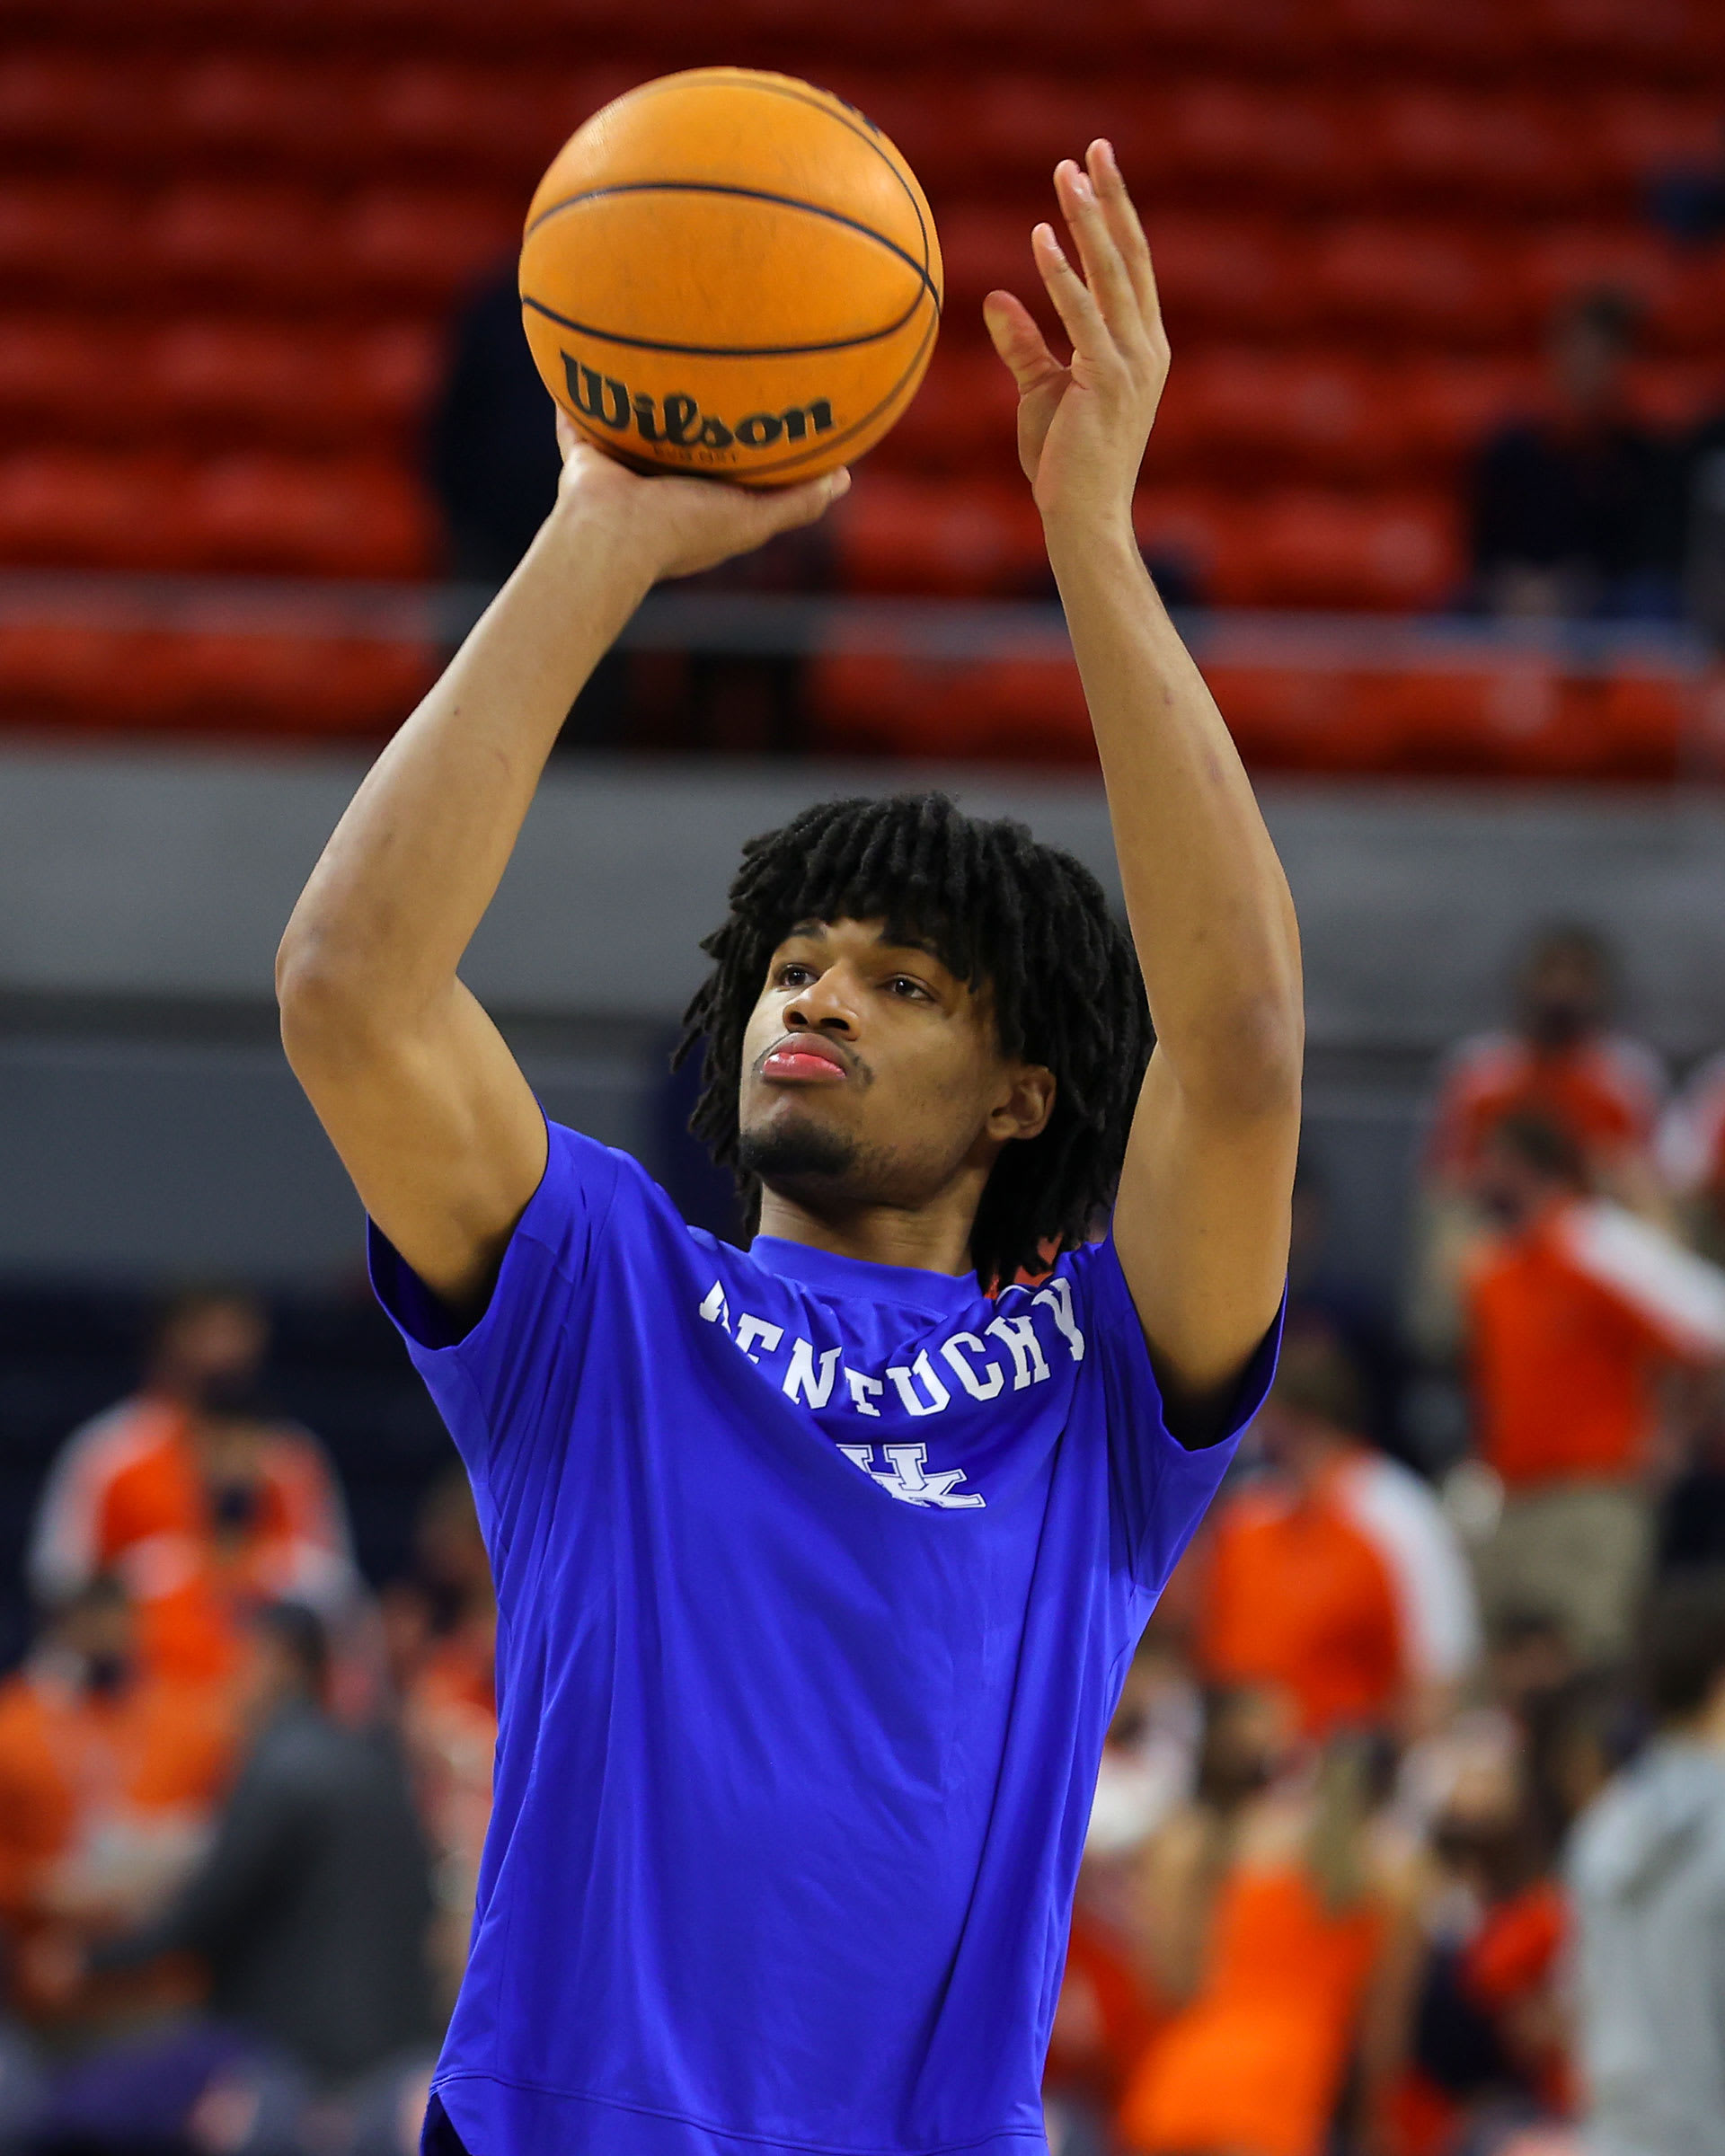 Shaedon Sharpe #21 of the Kentucky Wildcats warms up prior to the game against the Auburn Tigers